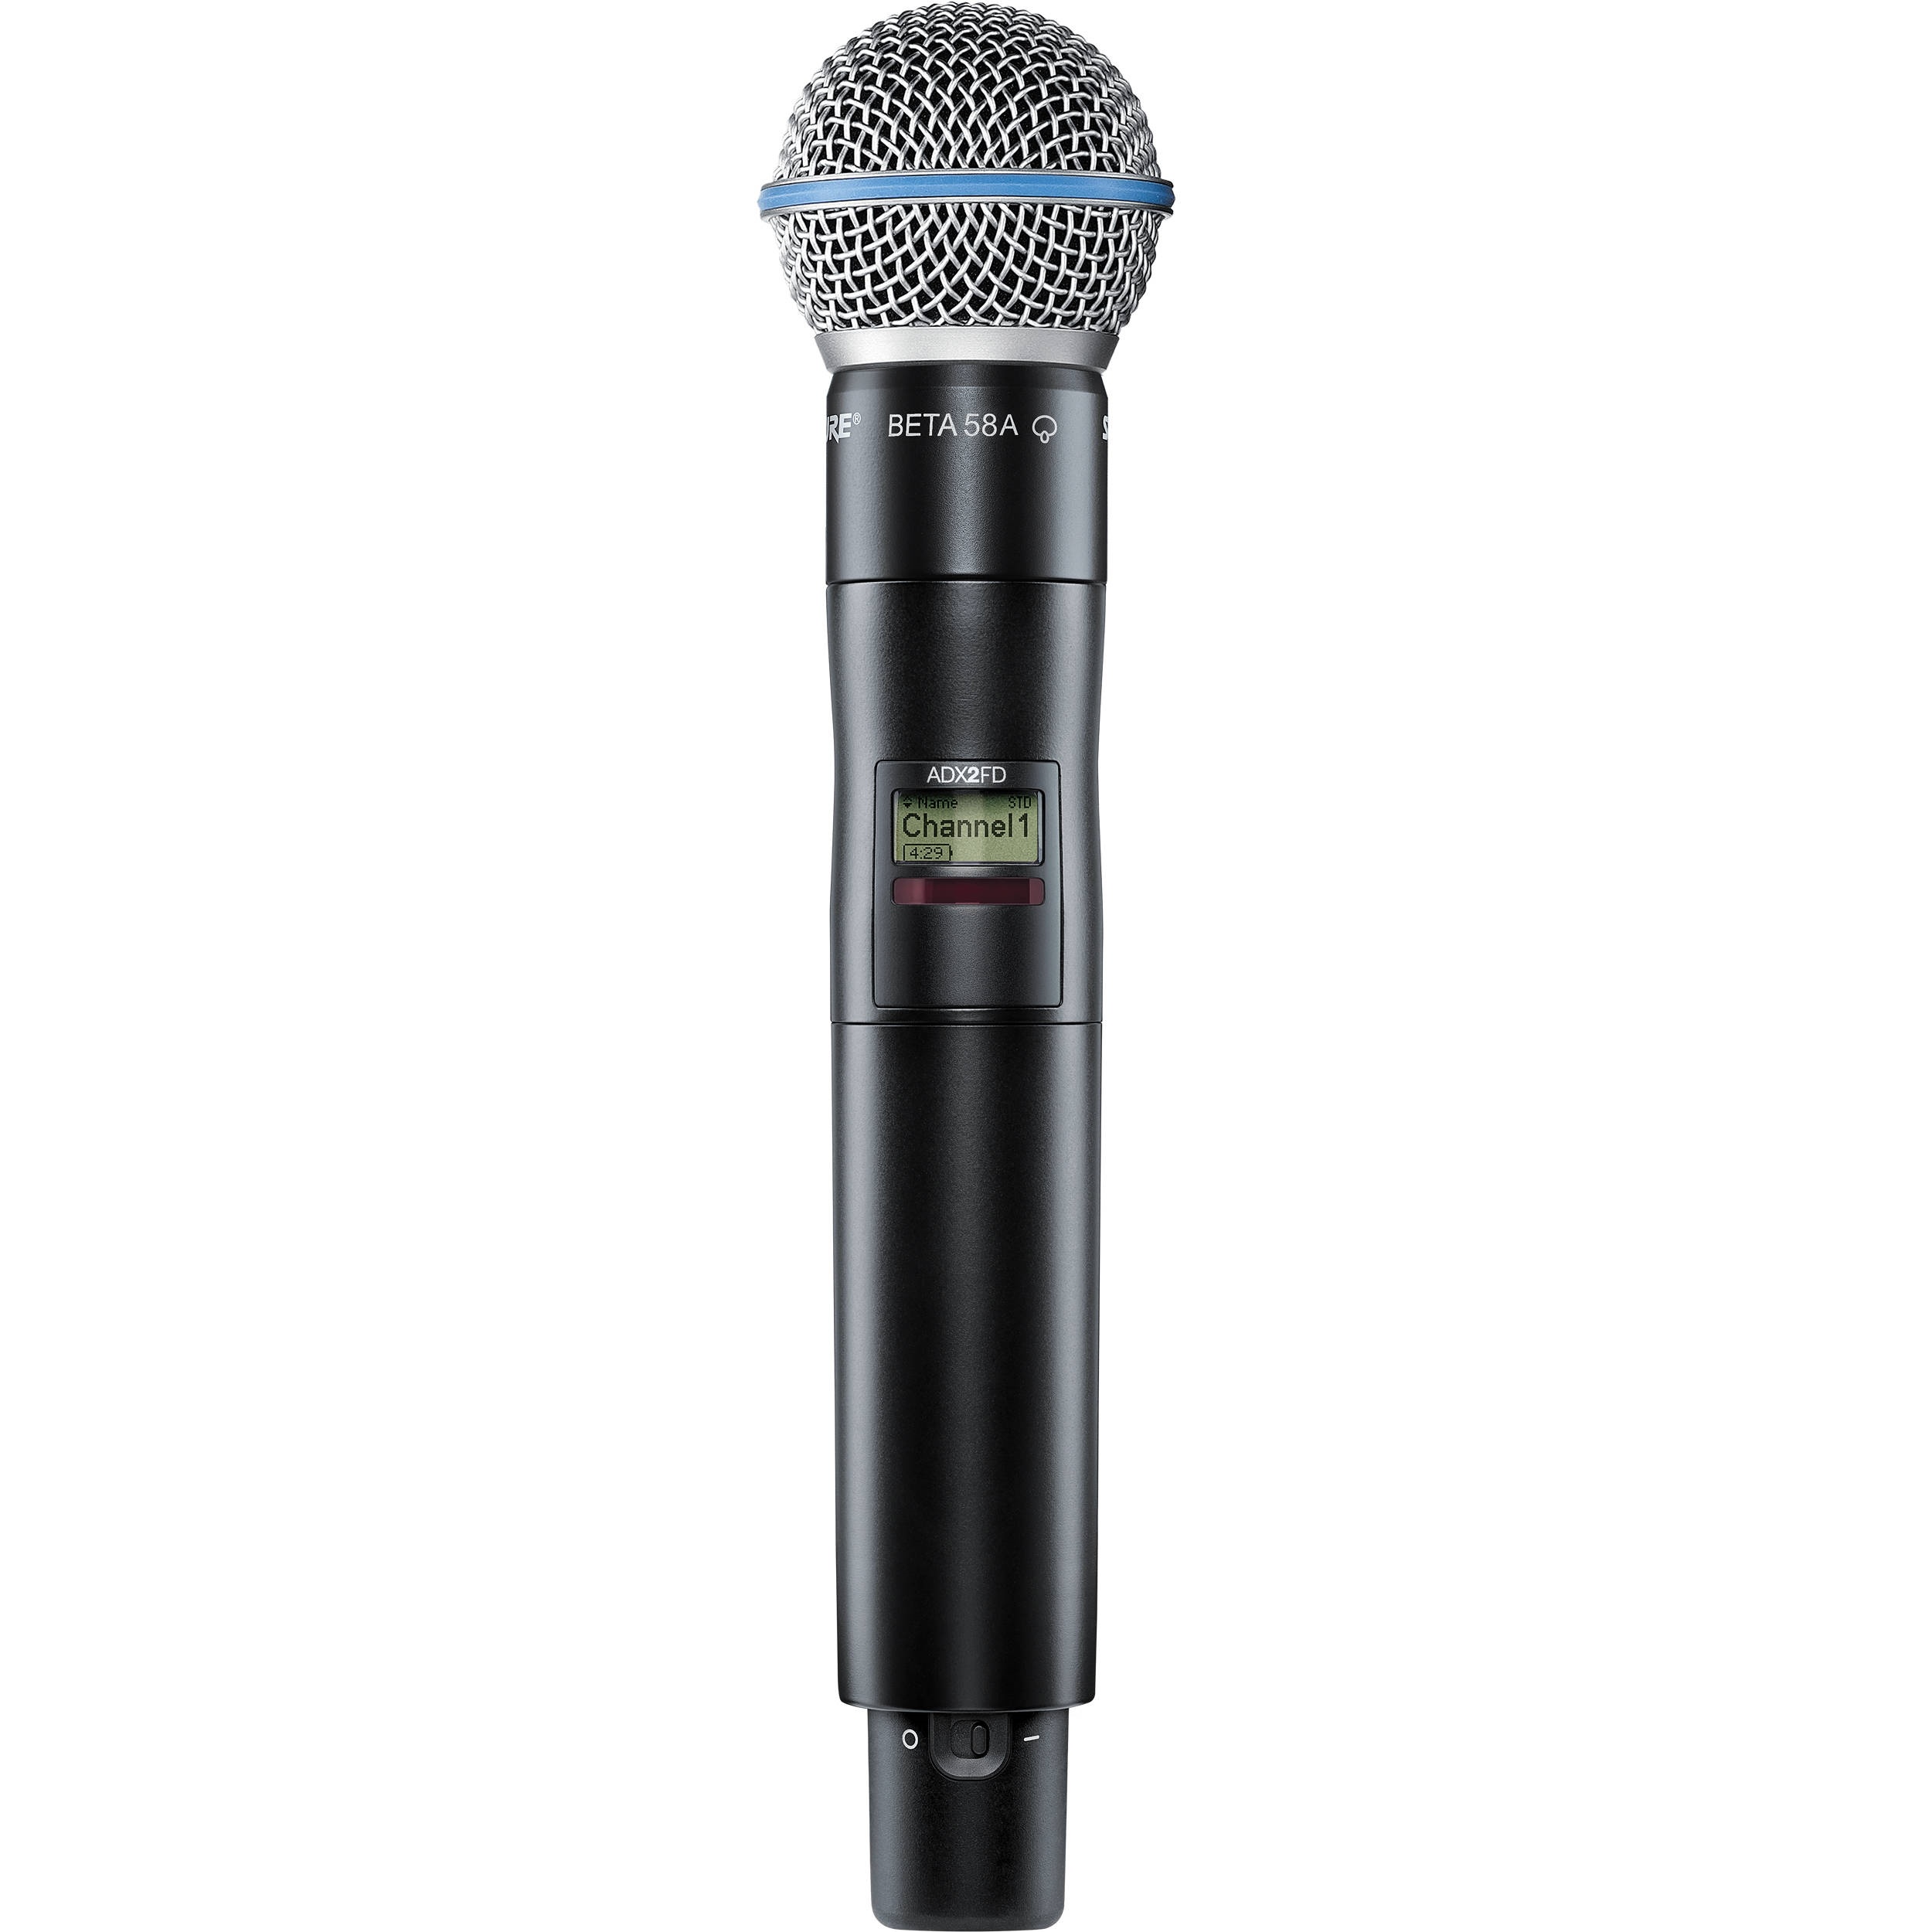 Shure ADX2FD/B58 Digital Handheld Wireless Microphone Transmitter with Beta 58A Capsule